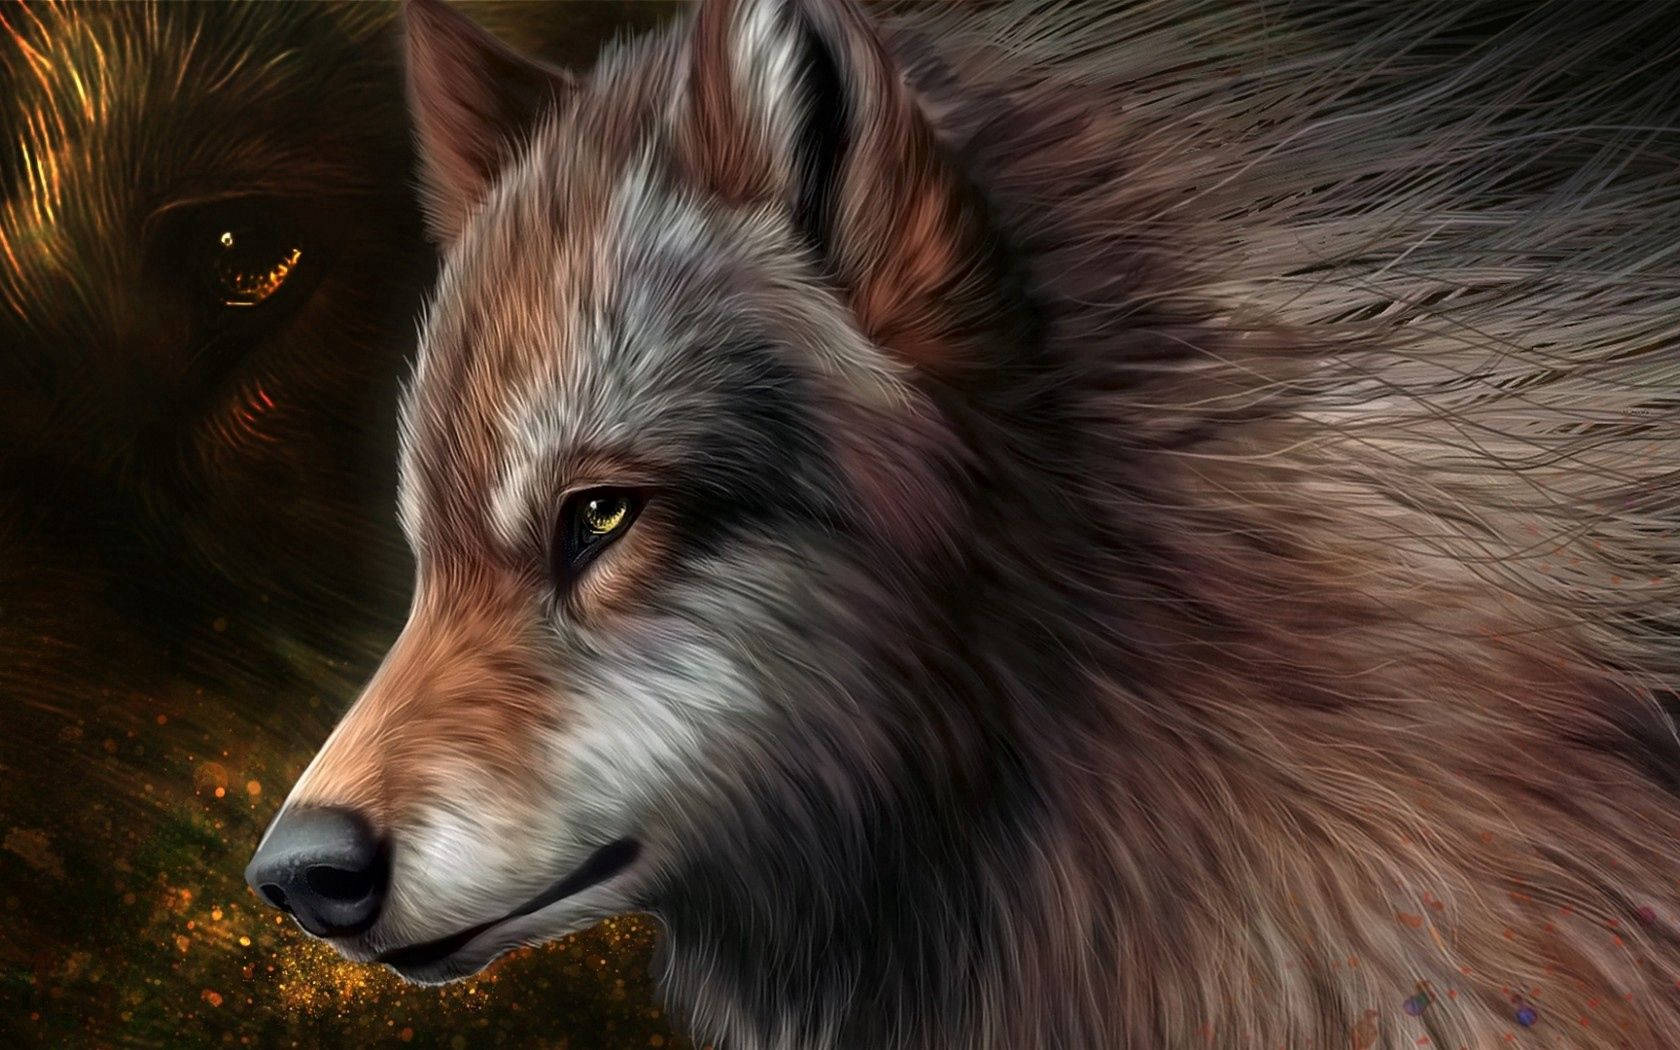 Wolf art with brown shiny fur looking from afar.